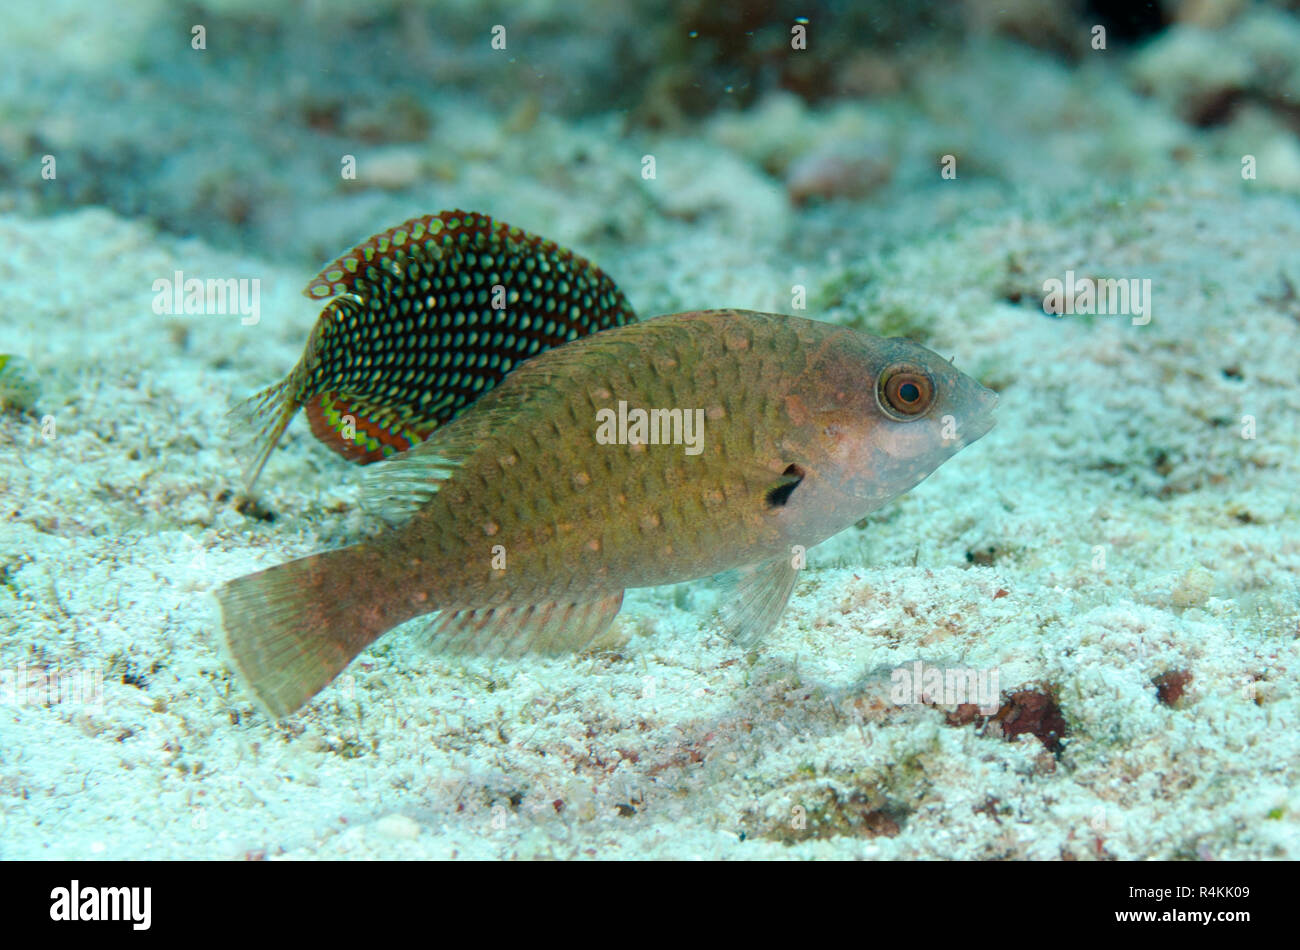 Raggedtooth Parrotfish, Calotomus spinidens, Avalanche dive site, off Nyata Island, near Alor, Indonesia, Indian Ocean Stock Photo